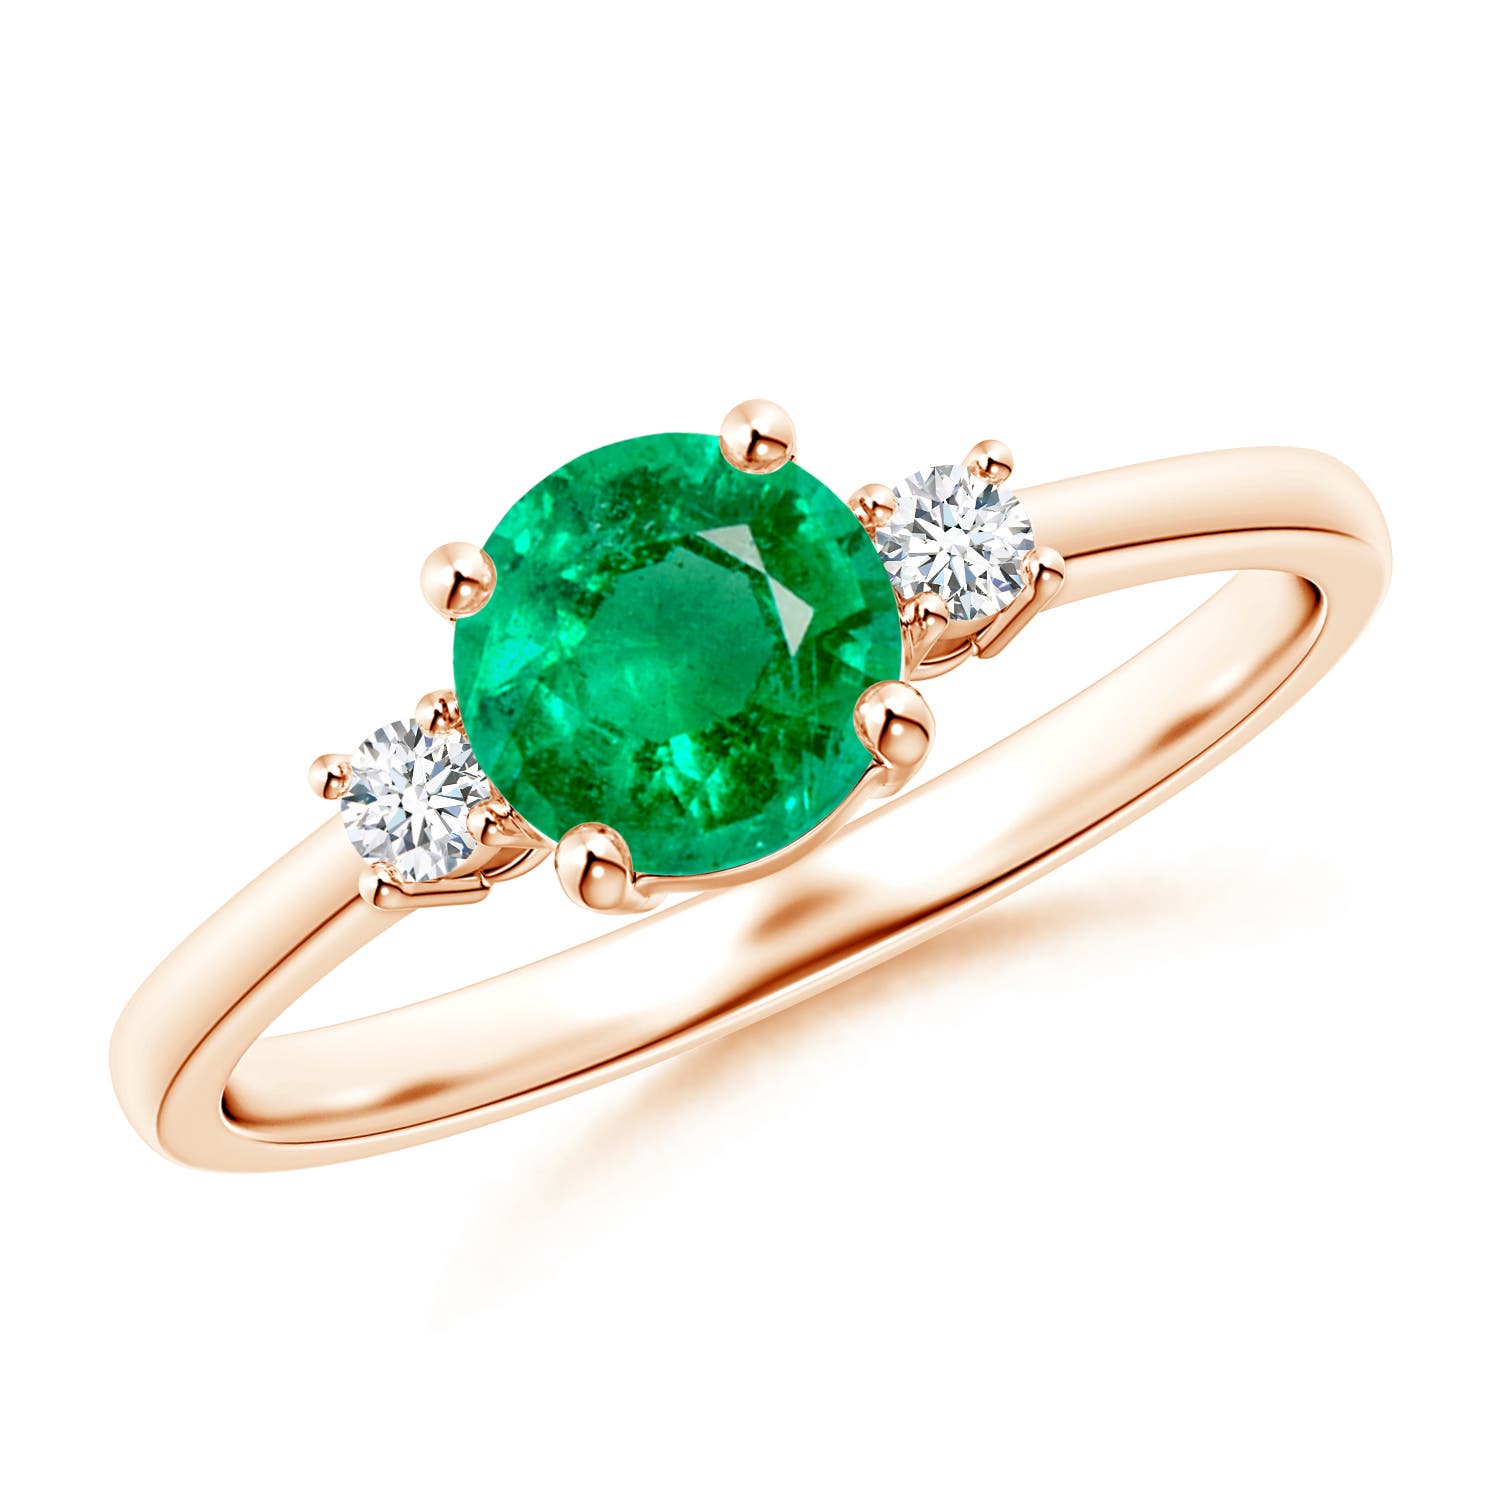 AAA - Emerald / 0.84 CT / 14 KT Rose Gold